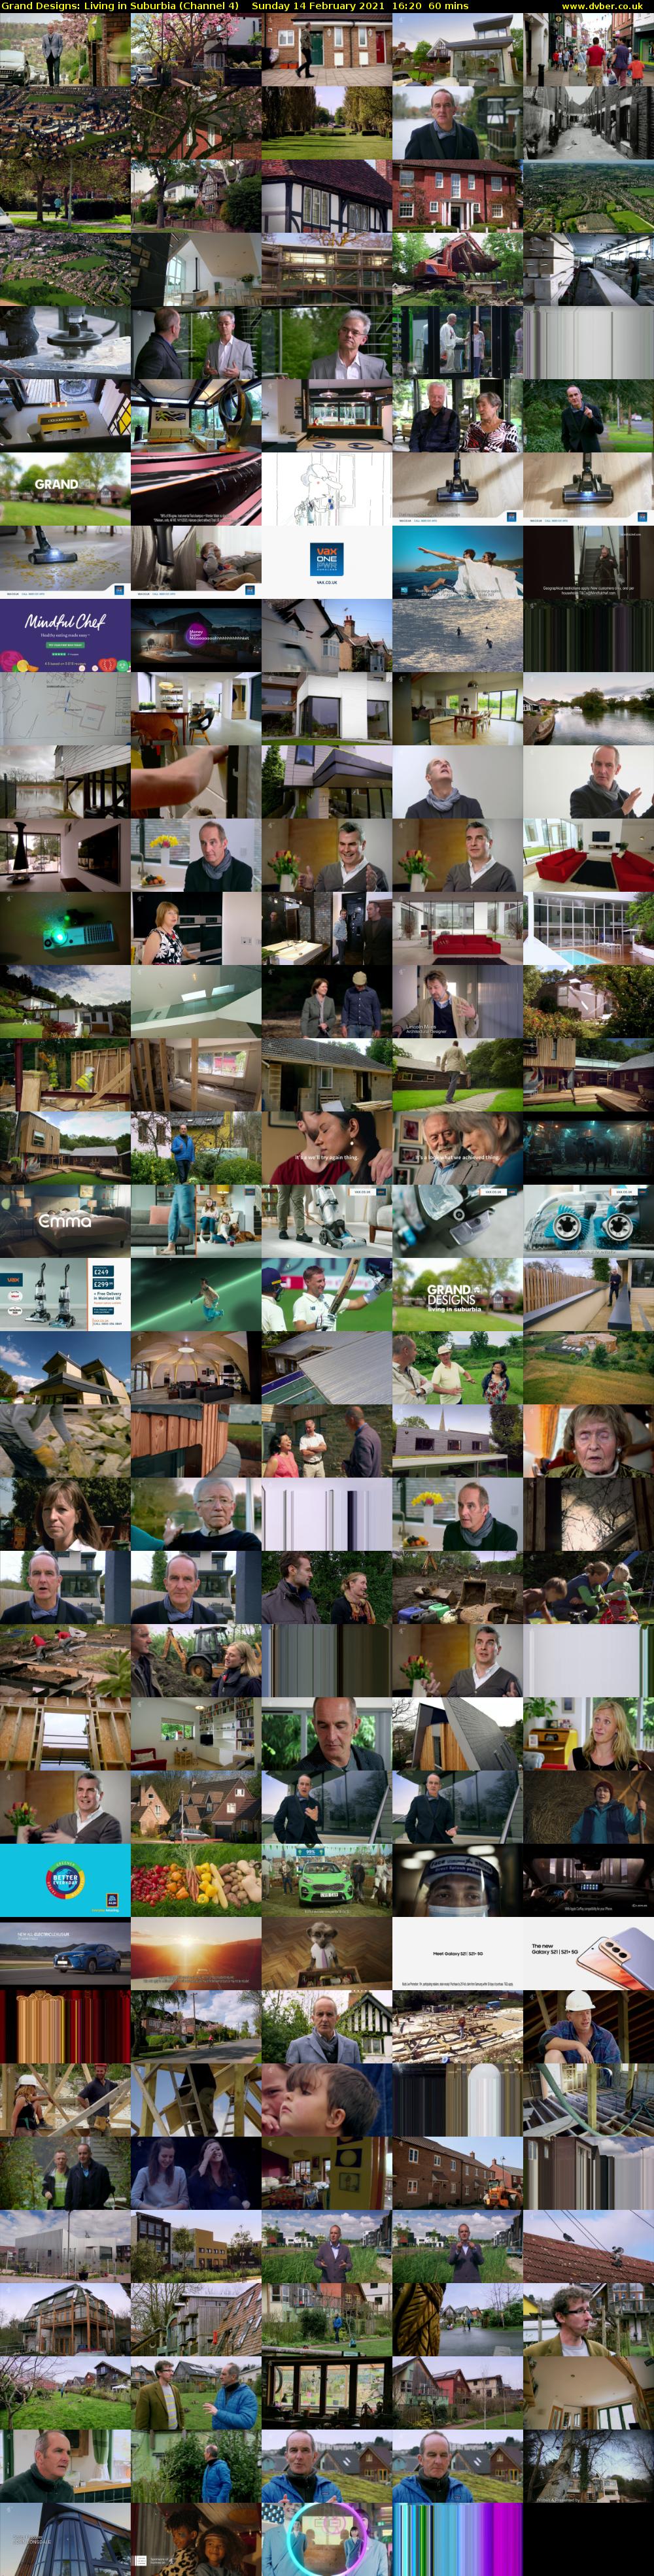 Grand Designs: Living in Suburbia (Channel 4) Sunday 14 February 2021 16:20 - 17:20